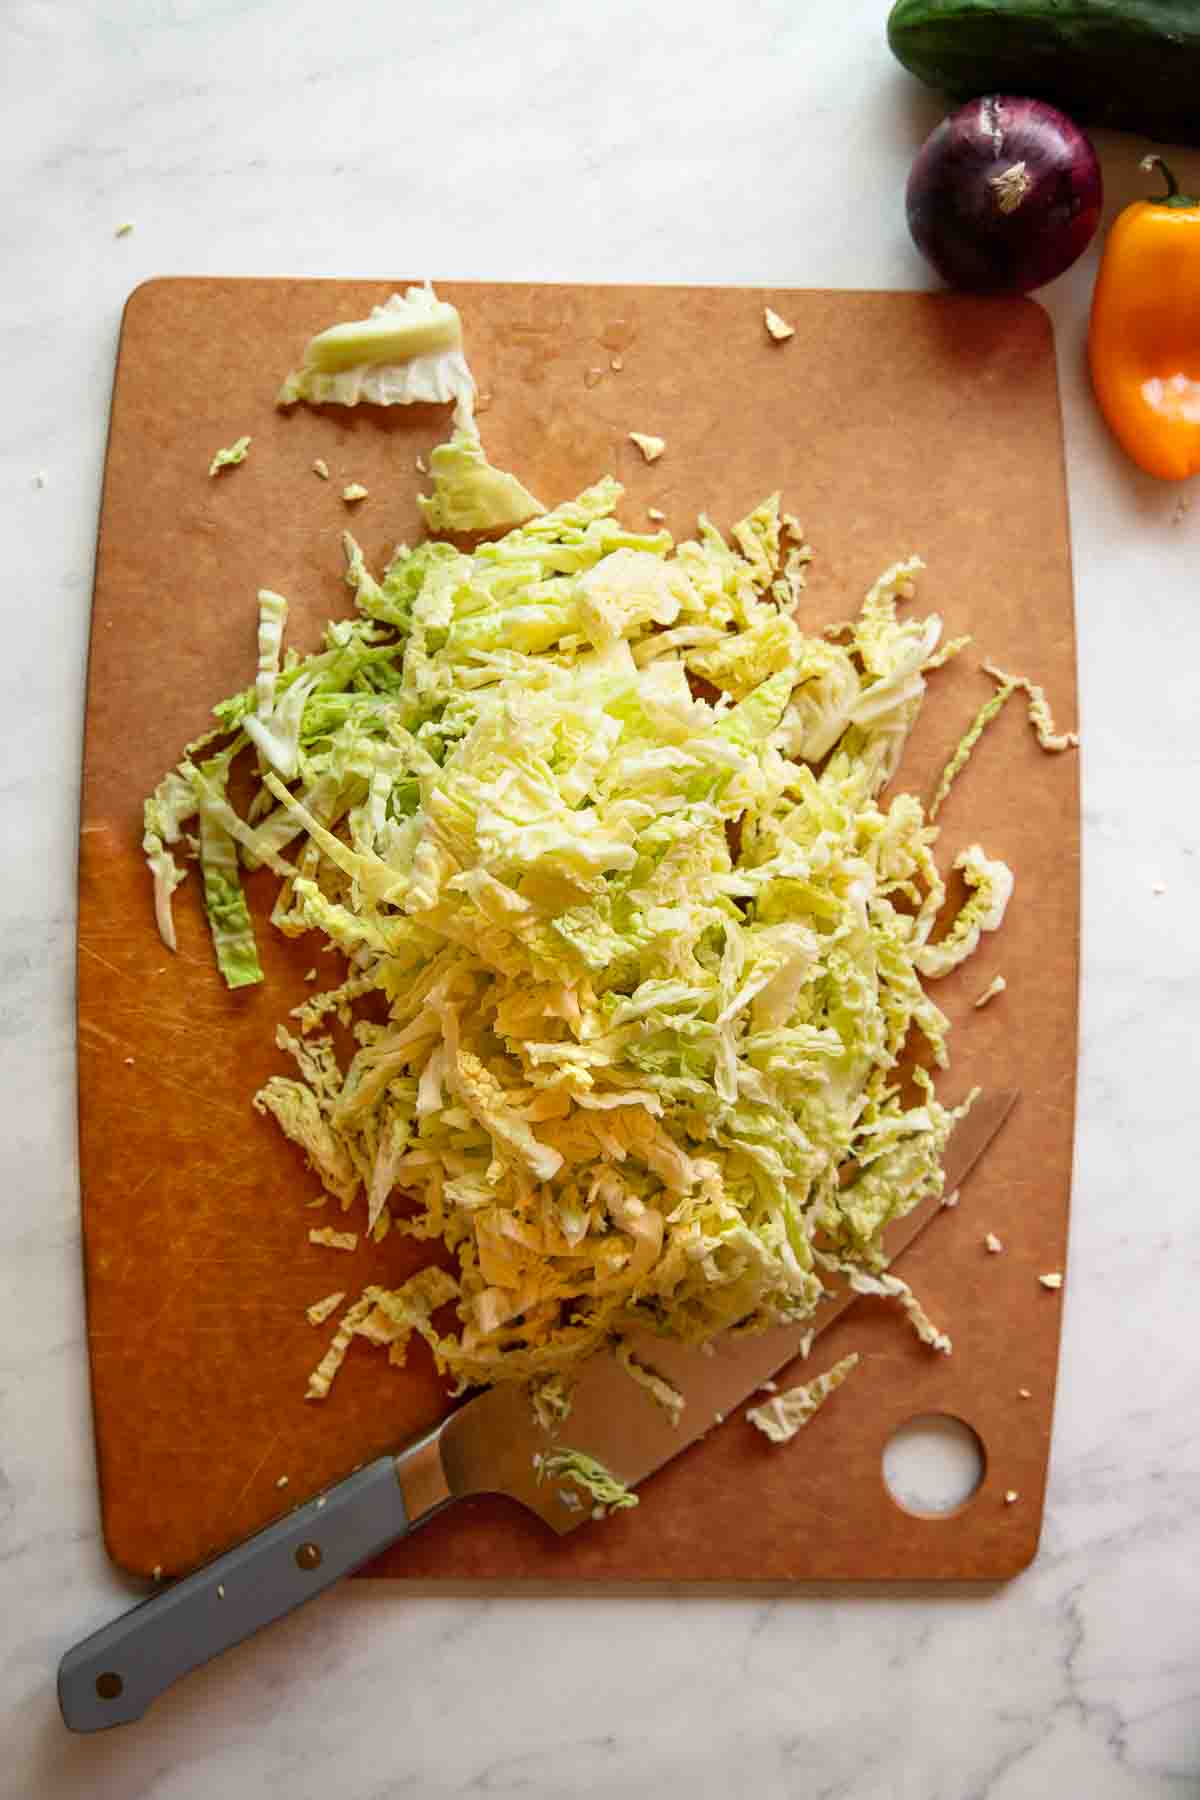 Sliced cabbage on a cutting board with a chef's knife and peppers surrounding it.